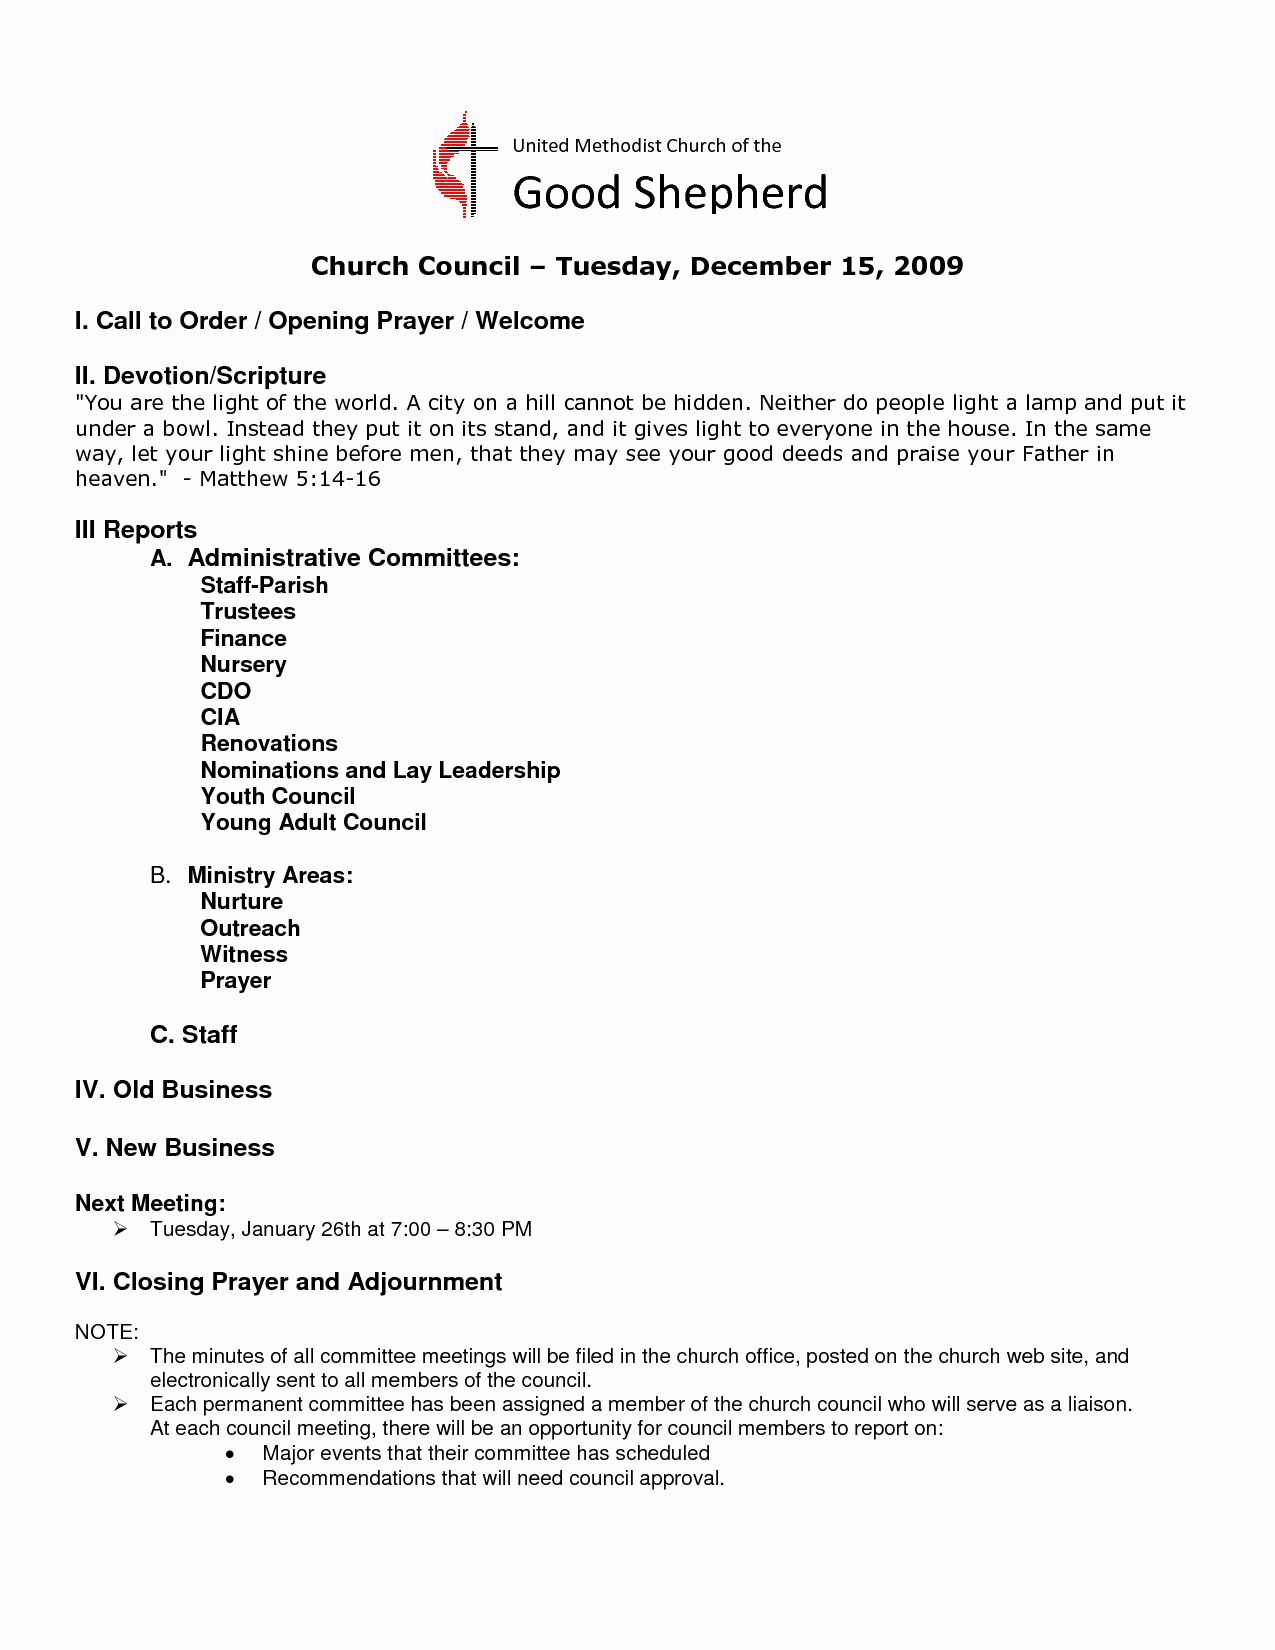 Church Meeting Minutes Template Luxury 10 Best Of Church Business Meeting Minutes Sample